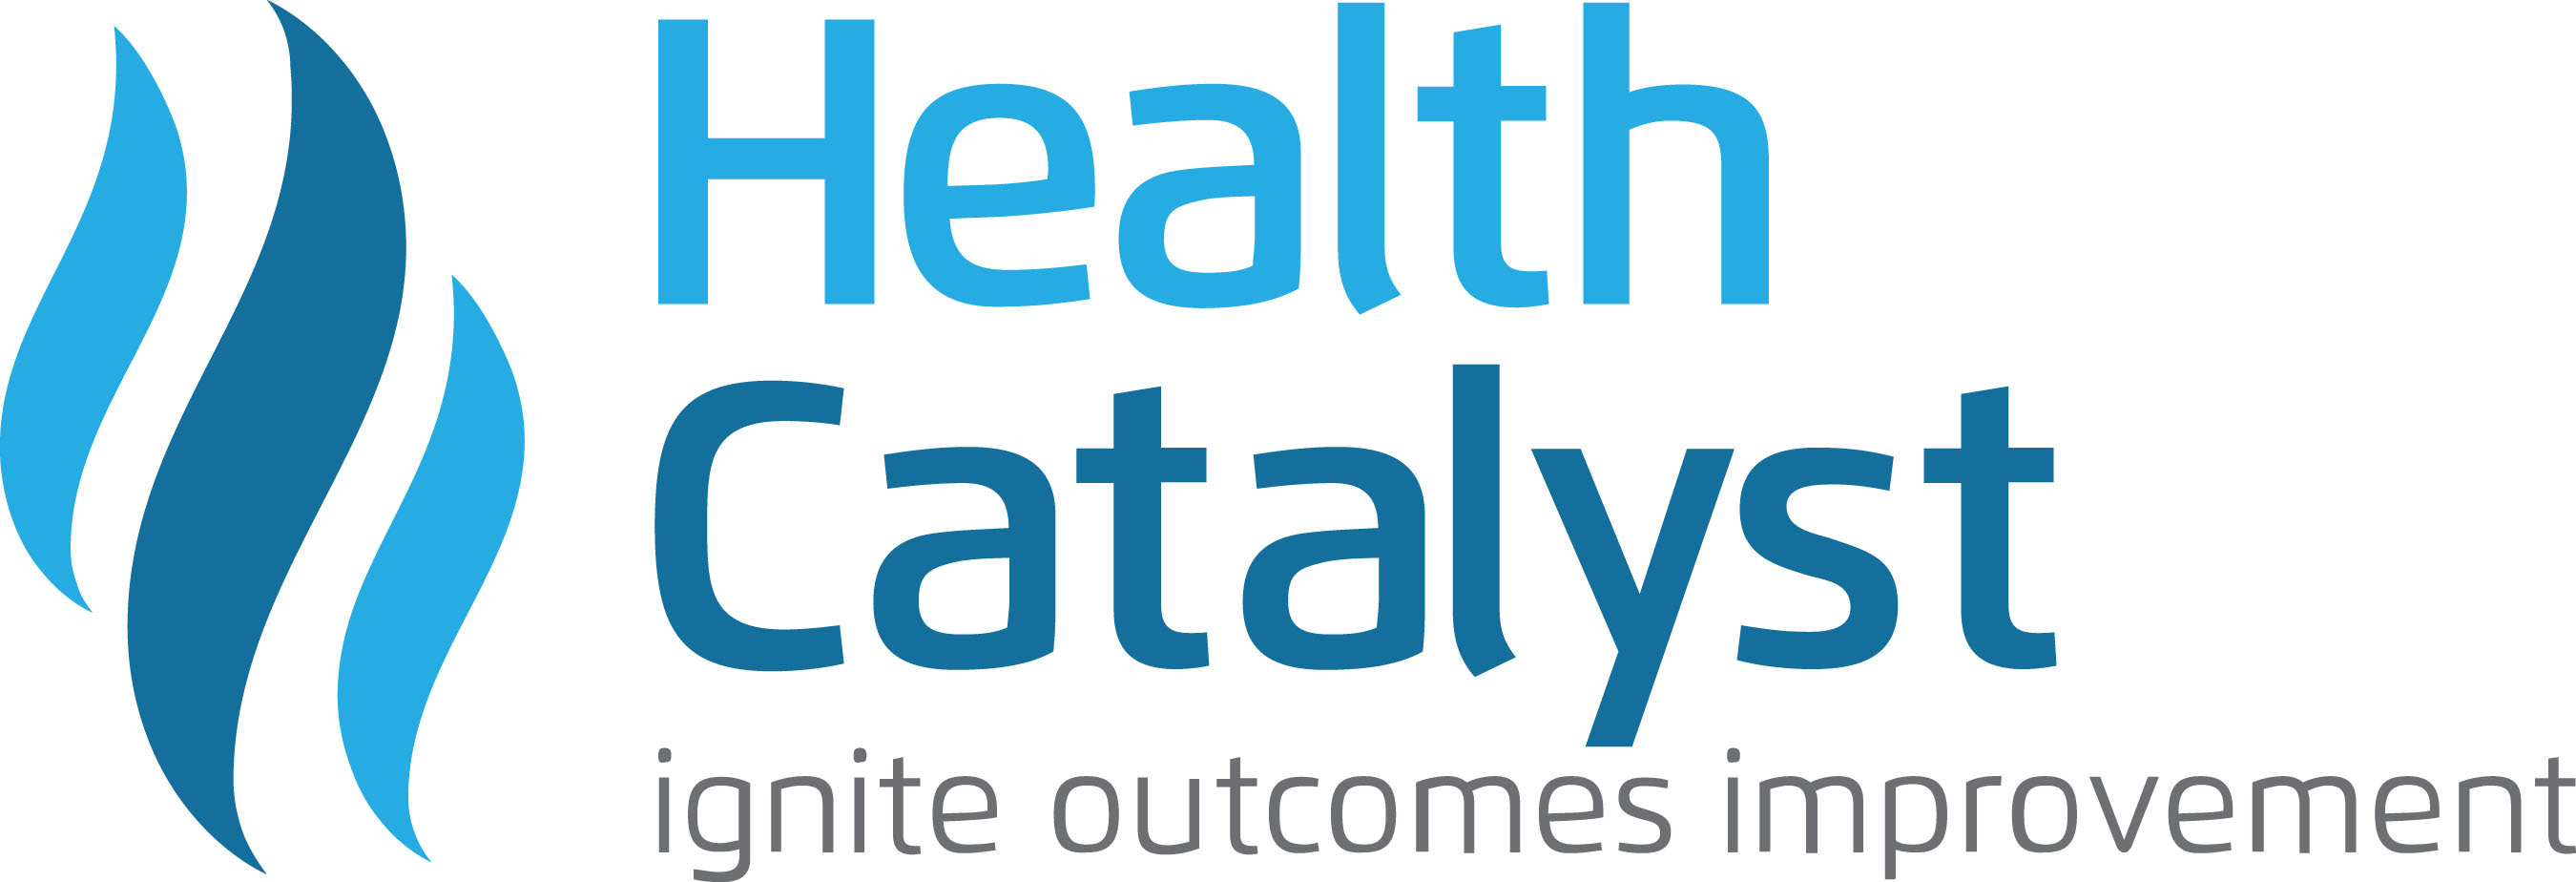 Health Catalyst is a next-generation data, analytics, and decision-support company, committed to being a catalyst for massive, sustained improvements in healthcare outcomes. Our proven data warehousing and analytics platform helps improve quality, add efficiency and lower costs in support of more than 85 million patients for organizations ranging from the largest US health system to forward-thinking physician practices. Visit www.healthcatalyst.com. (PRNewsFoto/HEALTH CATALYST)